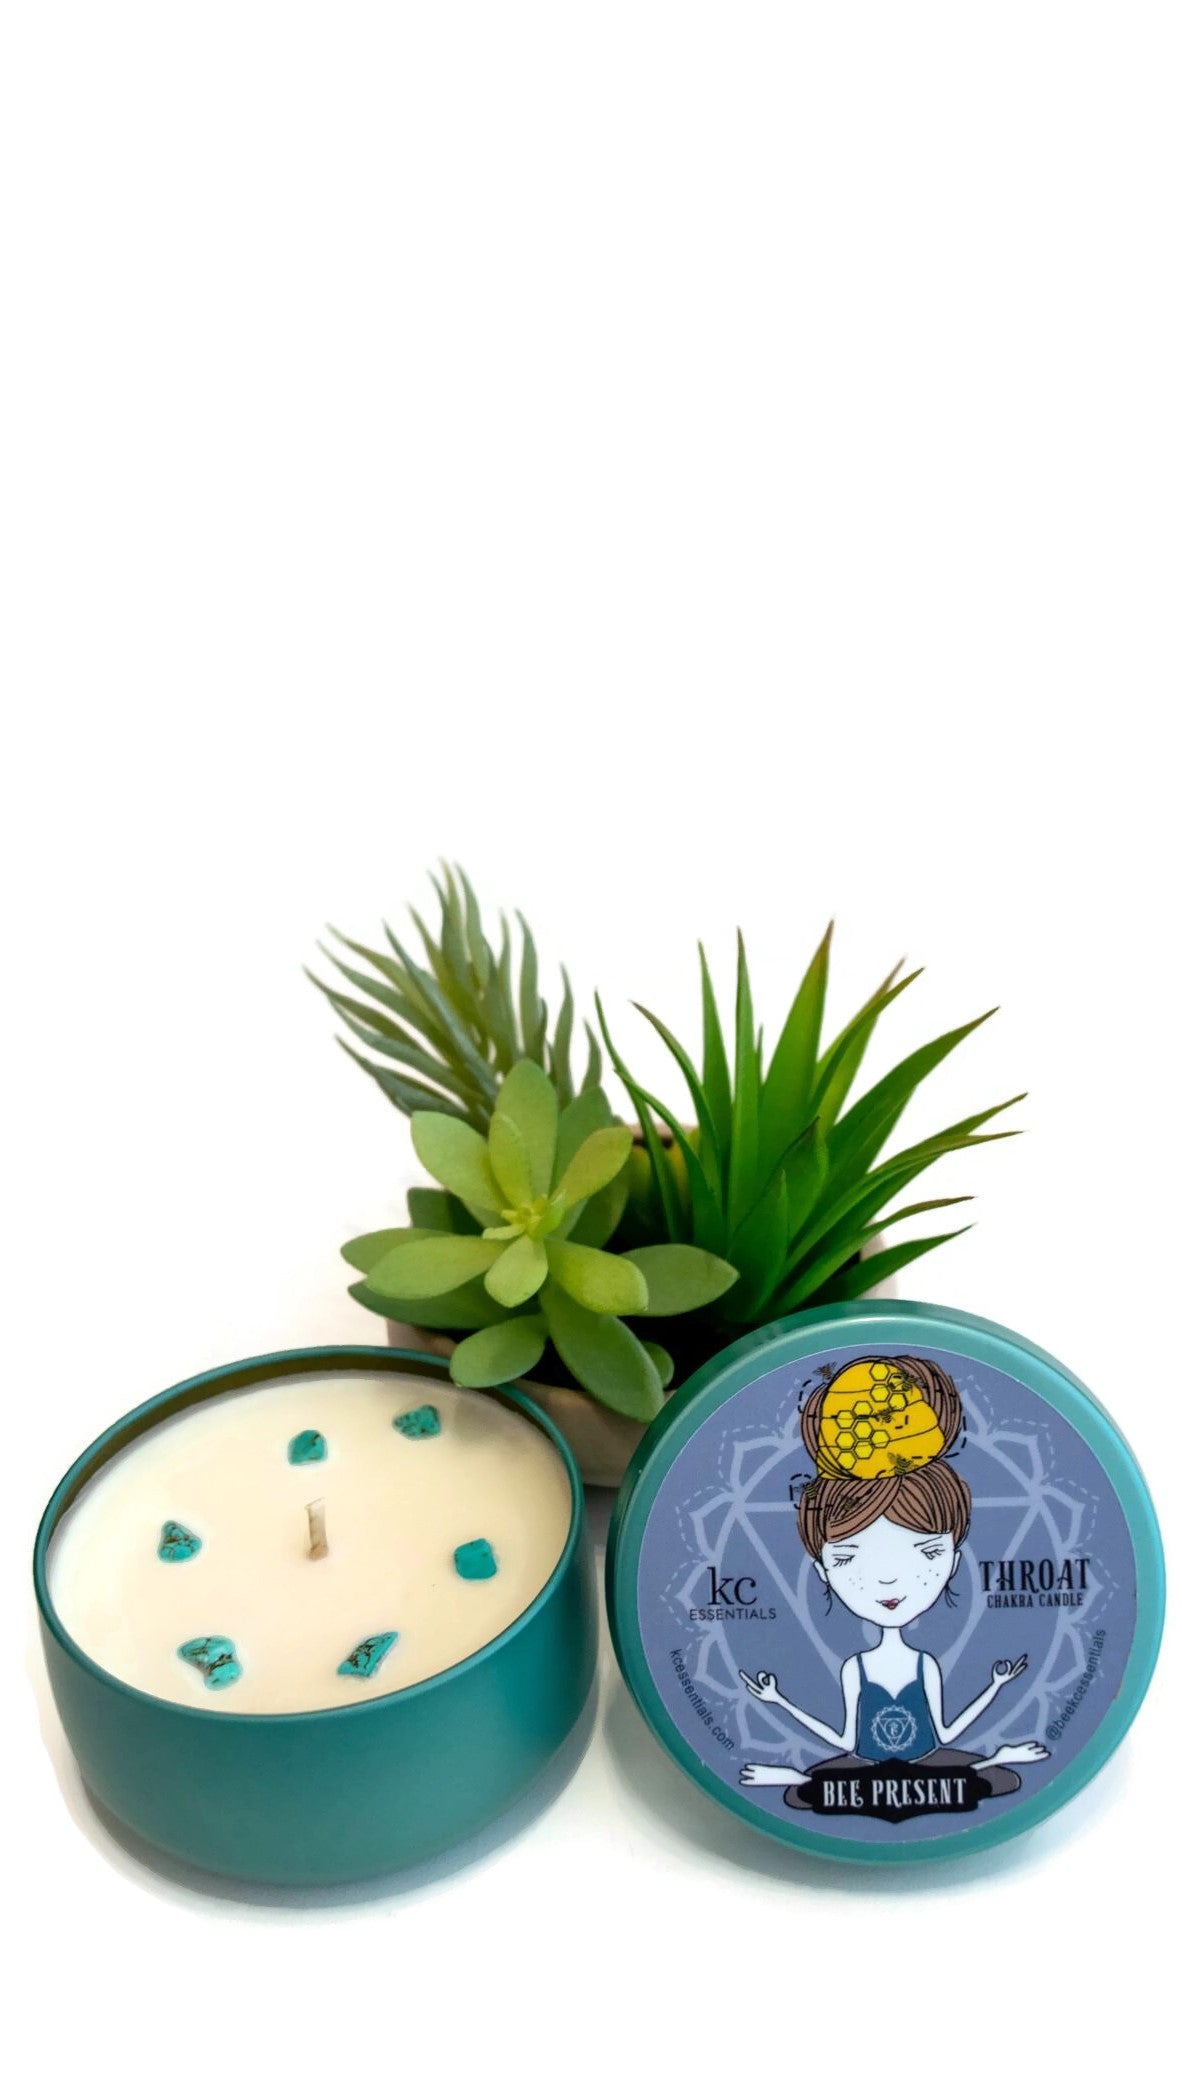 Small plant next to the Scented Throat Chakra Candle in shiny Turquoise colored Lidded Tin with Turquoise gemstones  in the soy wax. Lid shows a girl in a seated yoga pose